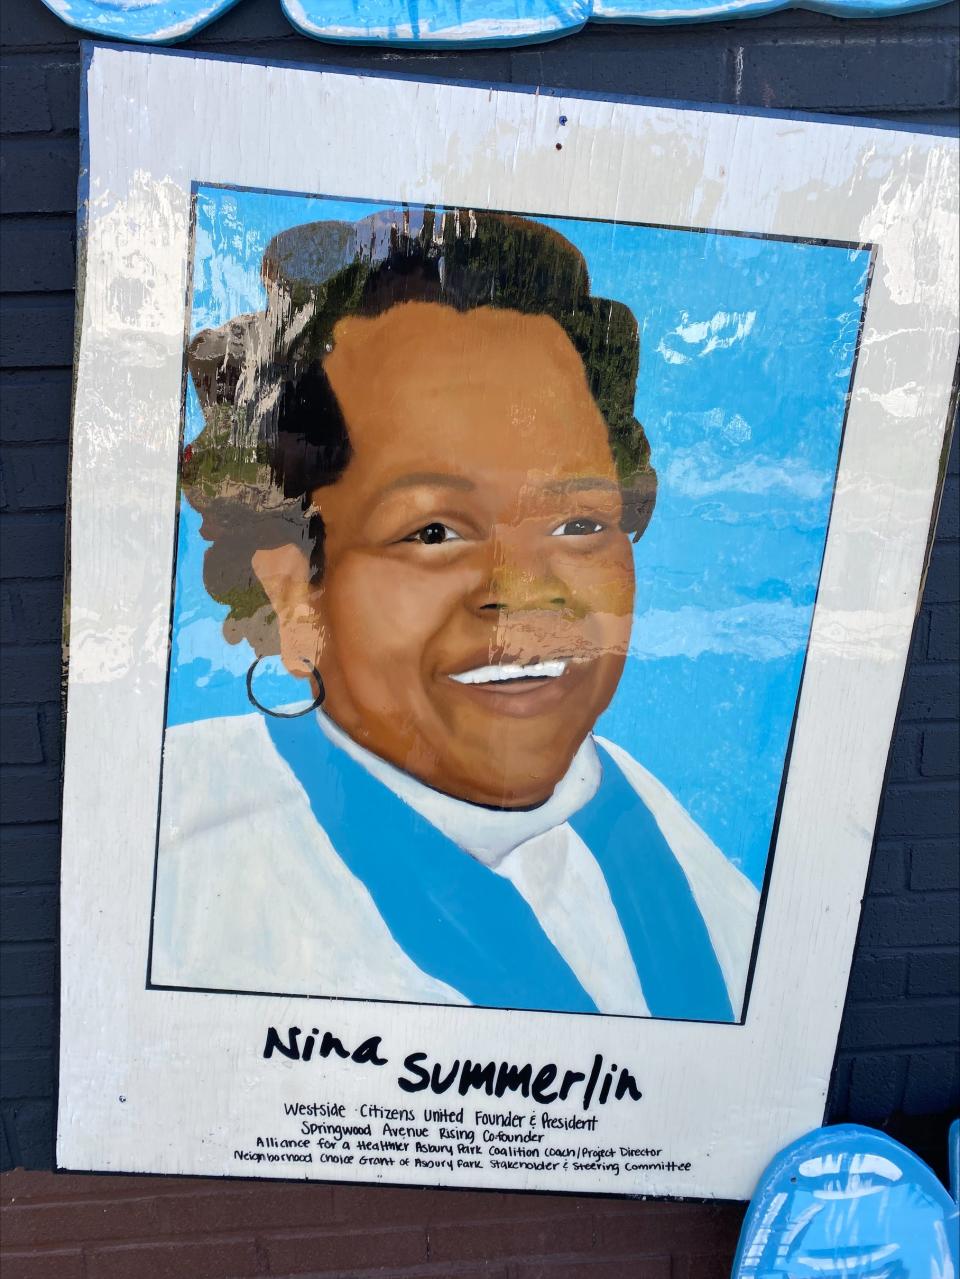 A mural of Nina Summerlin by Zalika Foy, also known as Urbaan Misfit, a local artist from Asbury Park, located at Sheffield’s Market at the corner of Prospect and Bangs avenues in Asbury Park. Sept. 19 2023.